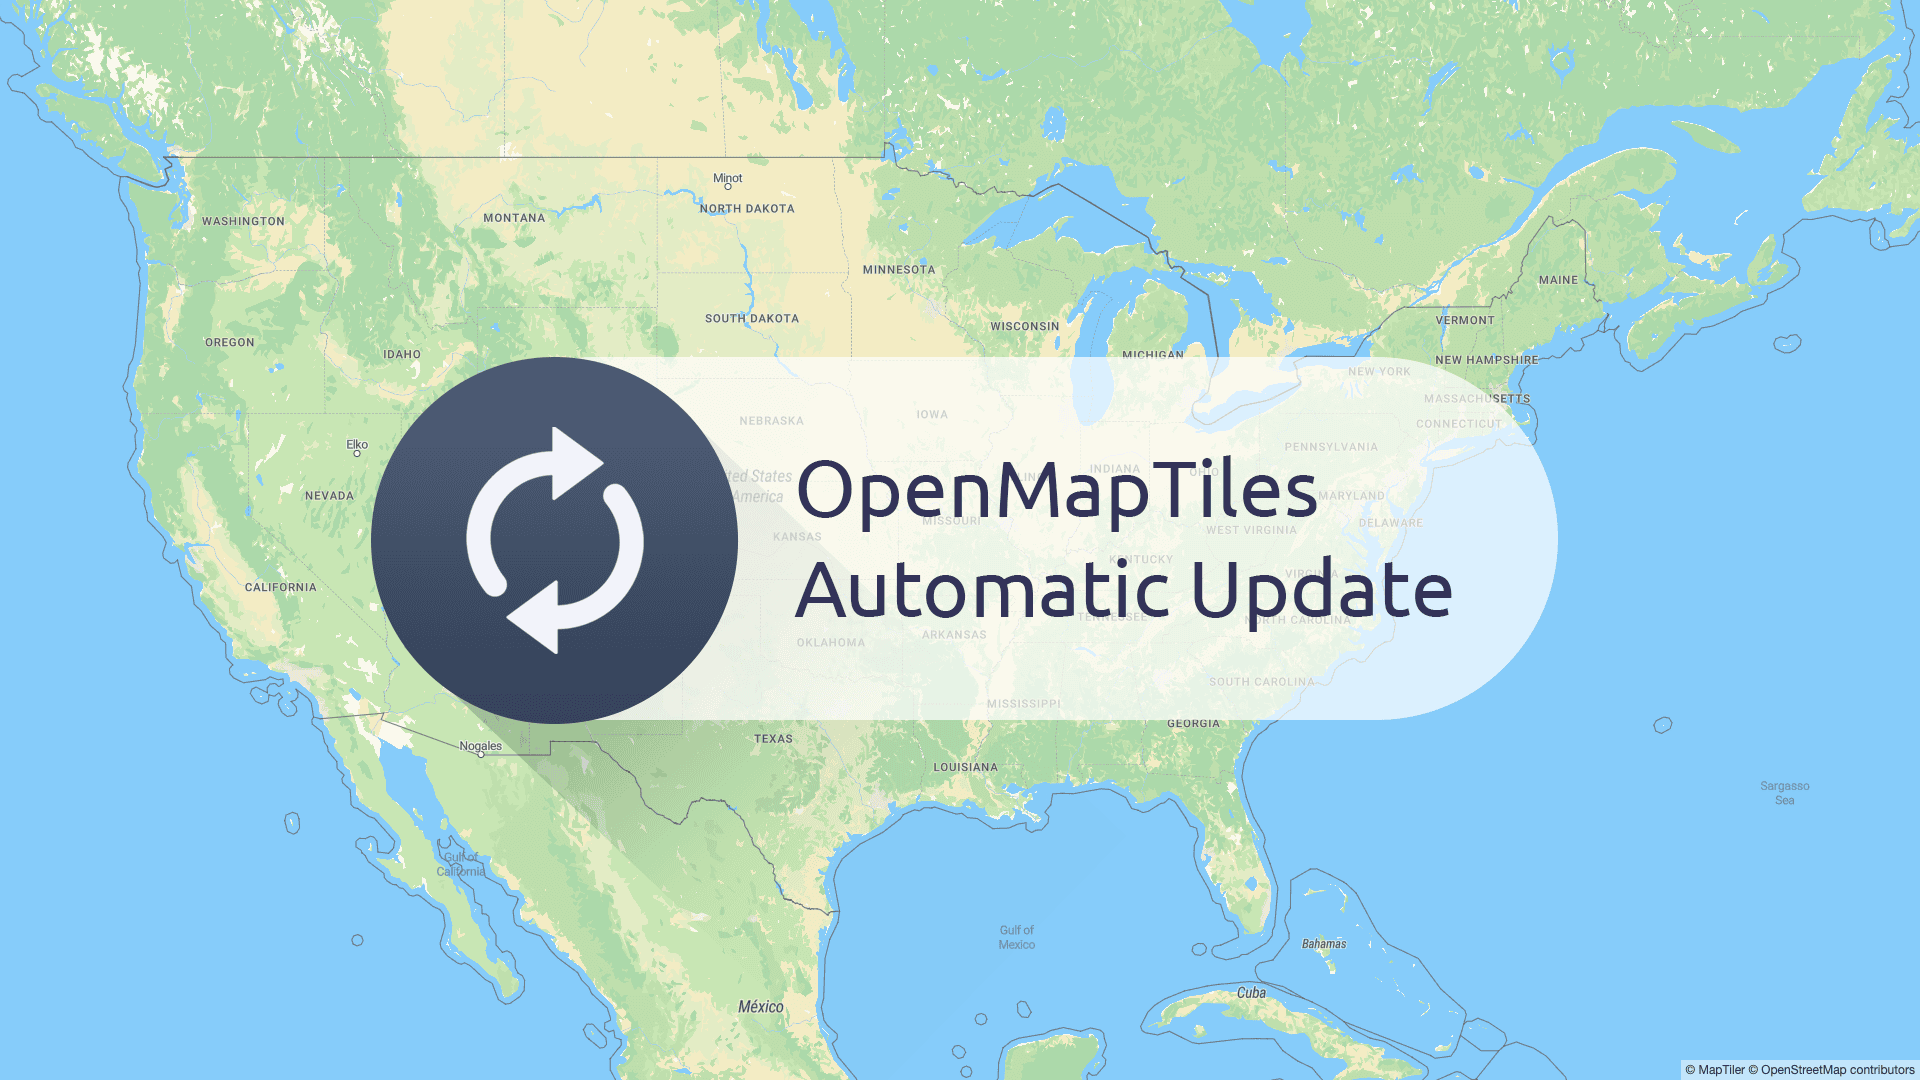 Autoupdate for on-premises maps